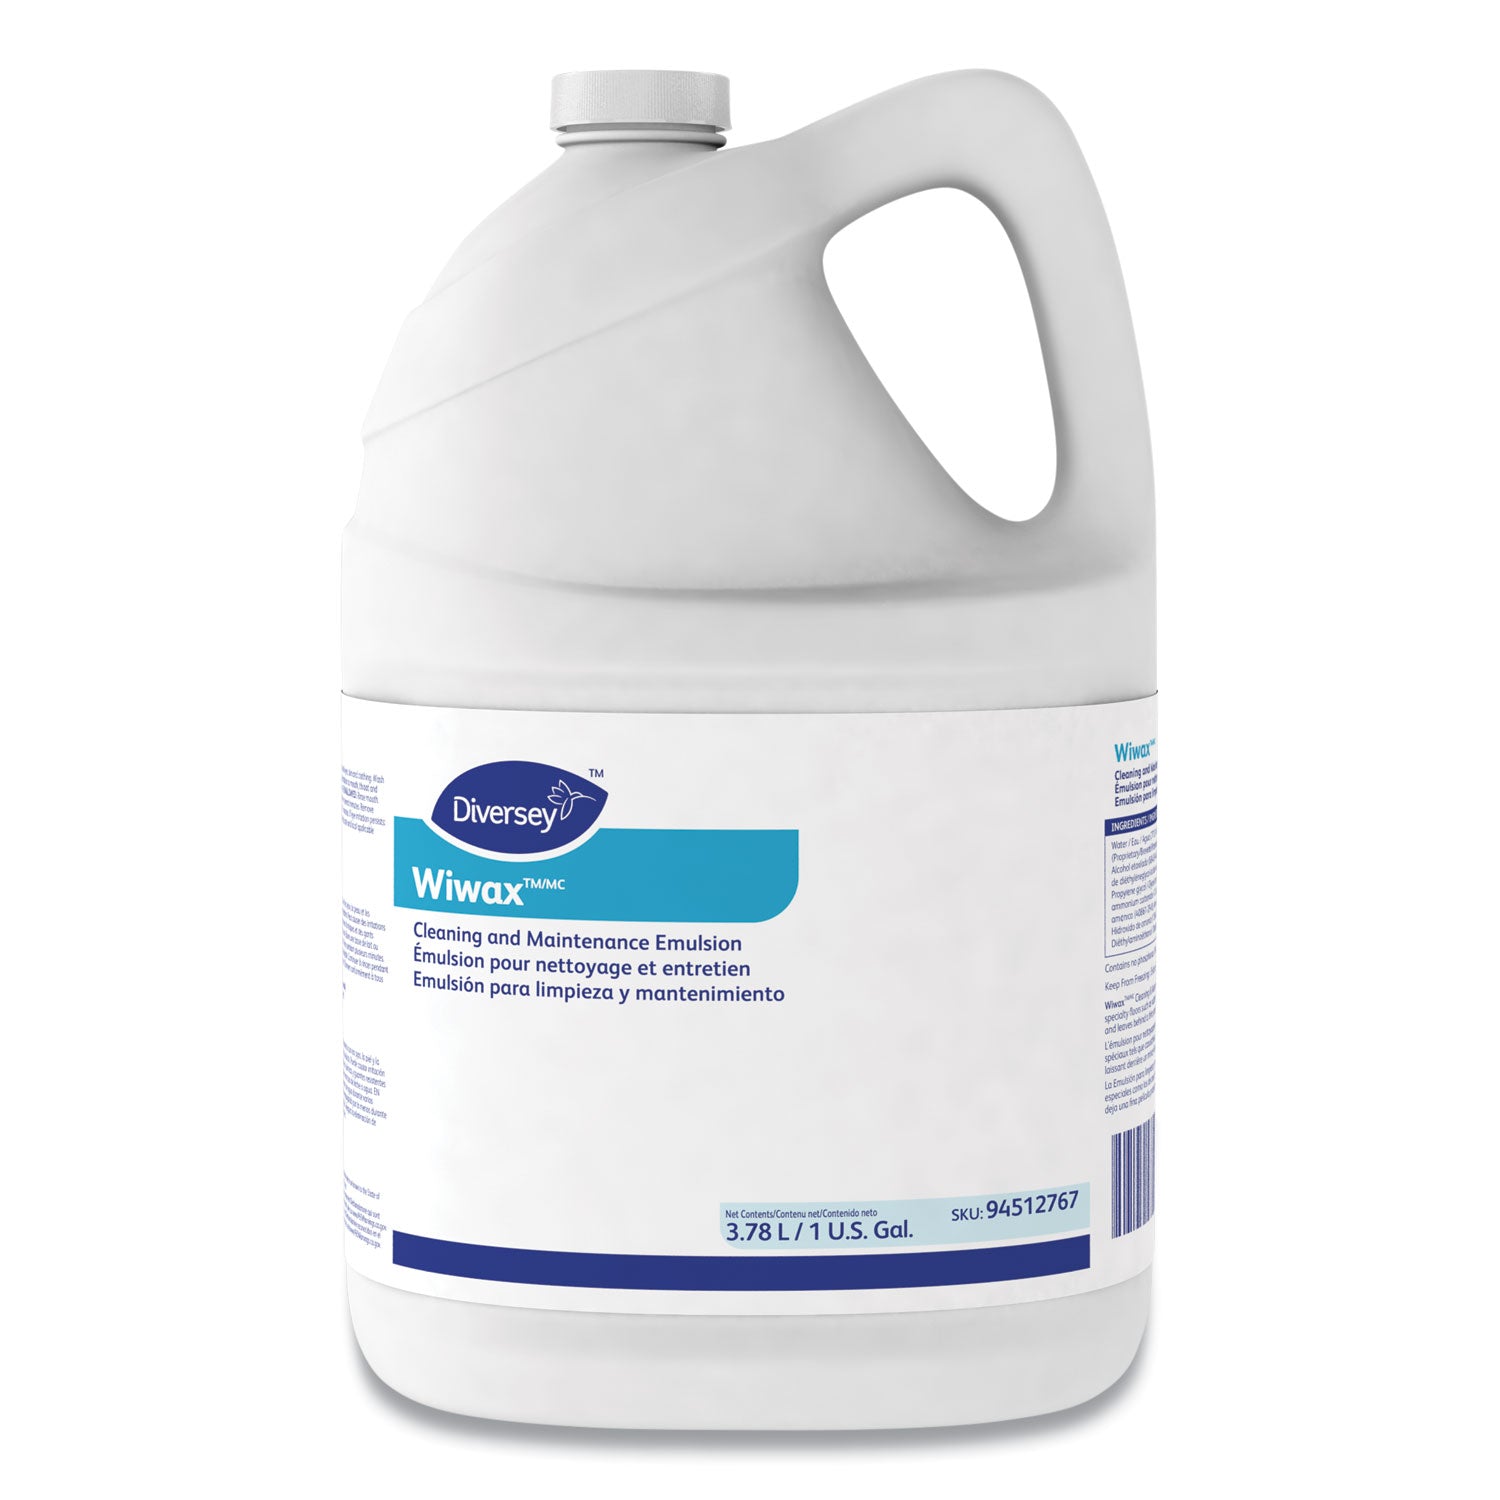 wiwax-cleaning-and-maintenance-solution-liquid-1-gal-bottle-4-carton_dvo94512767 - 2